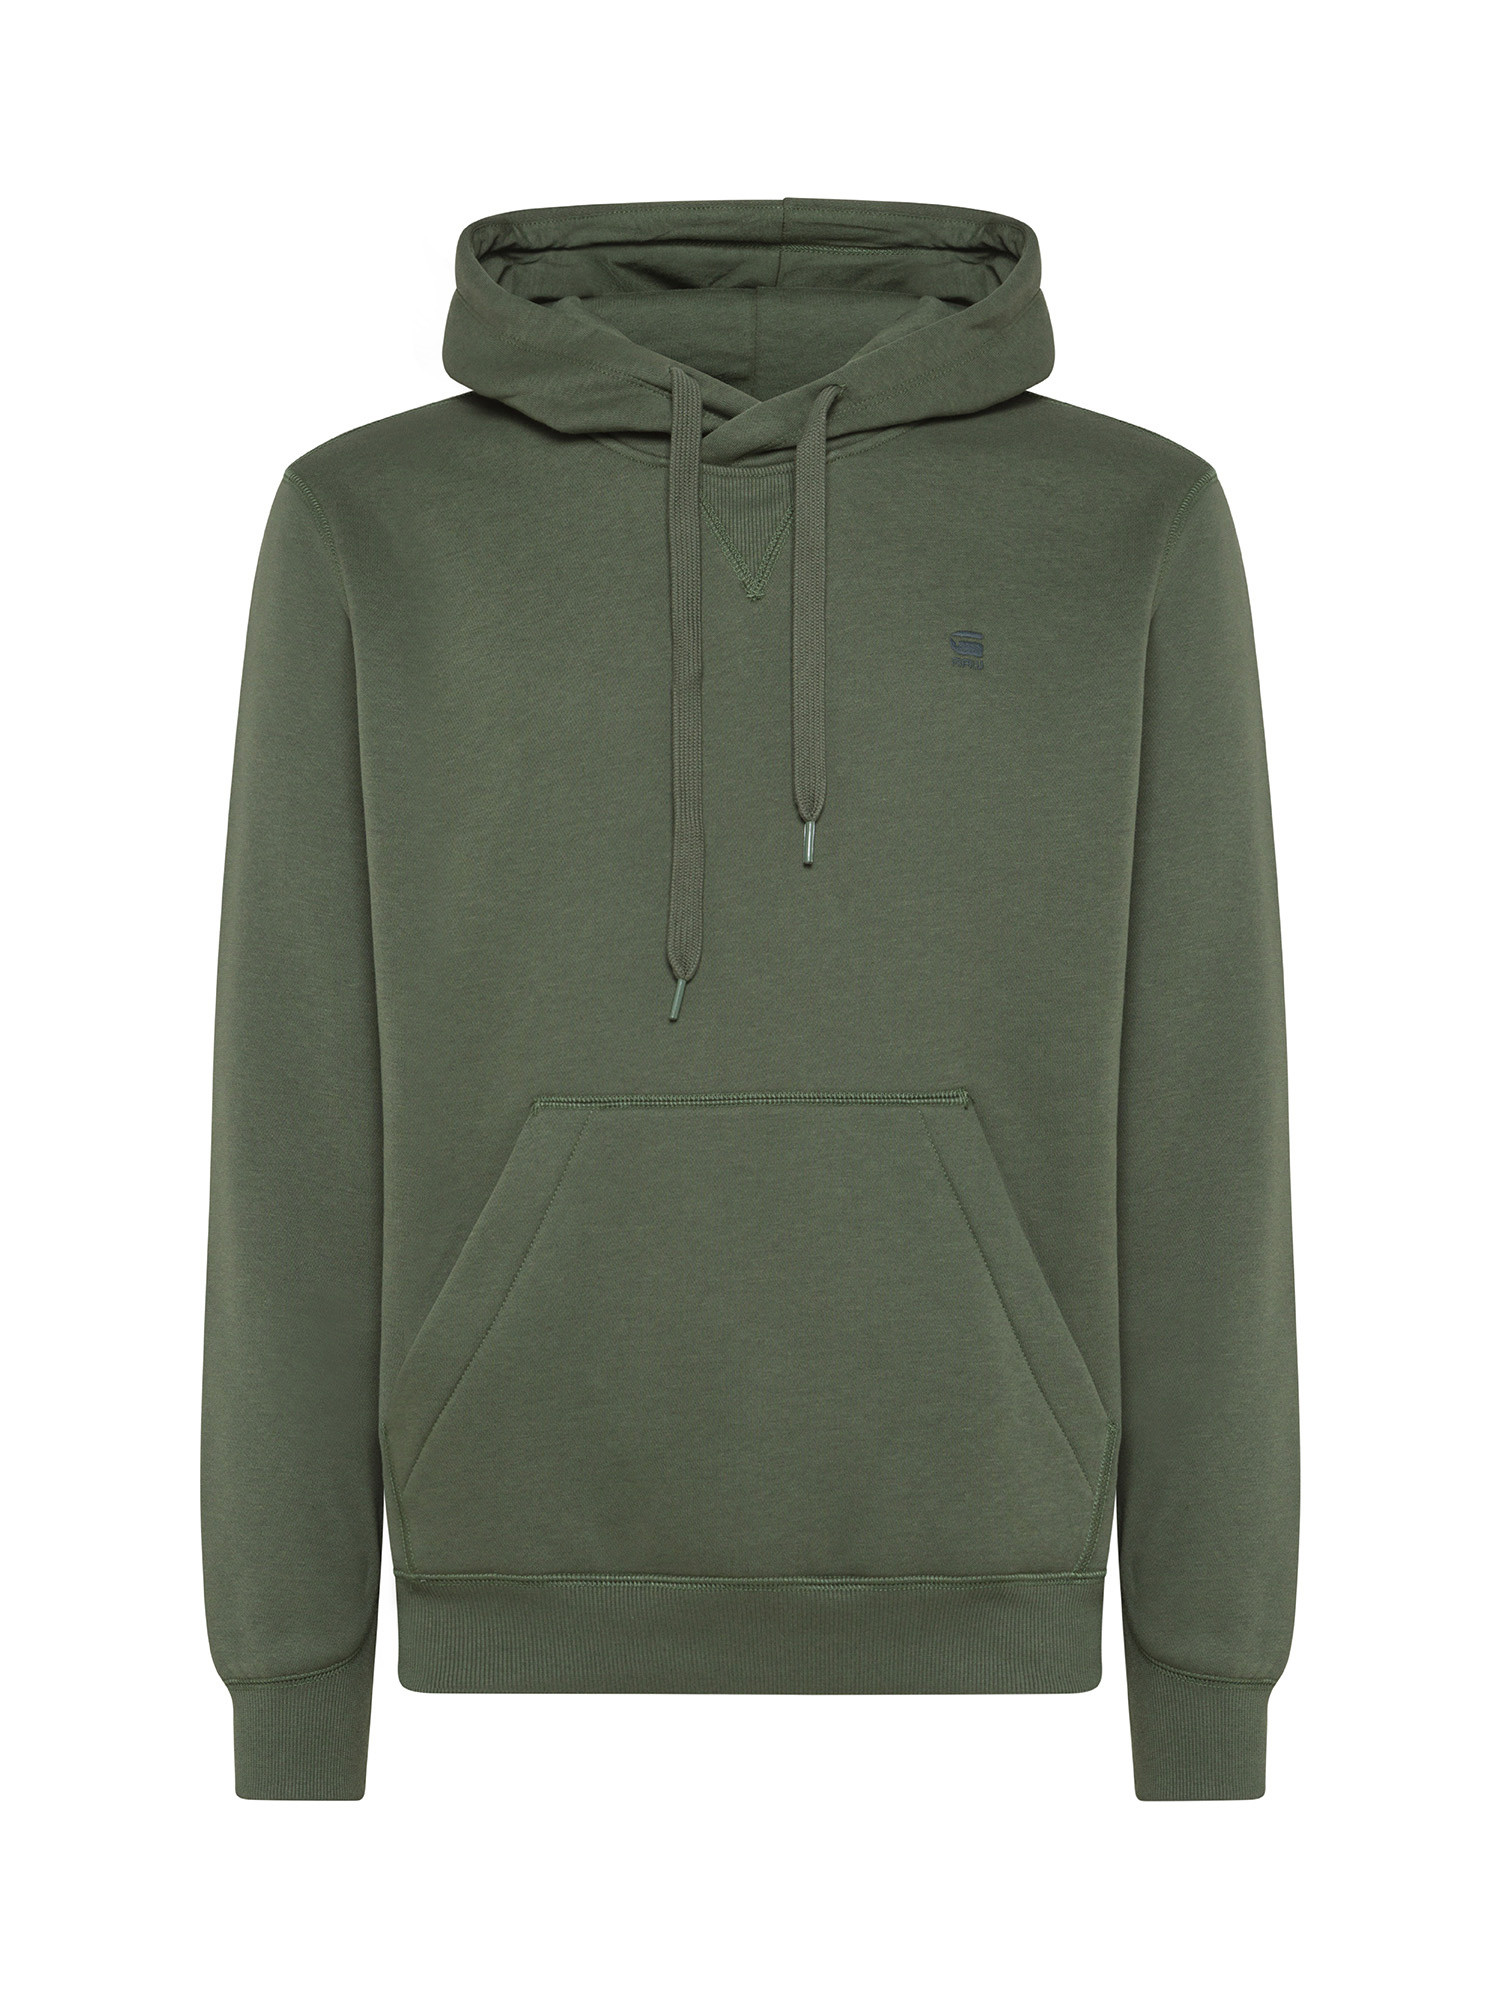 G-Star - Hooded sweatshirt with logo embroidery, Olive Green, large image number 0